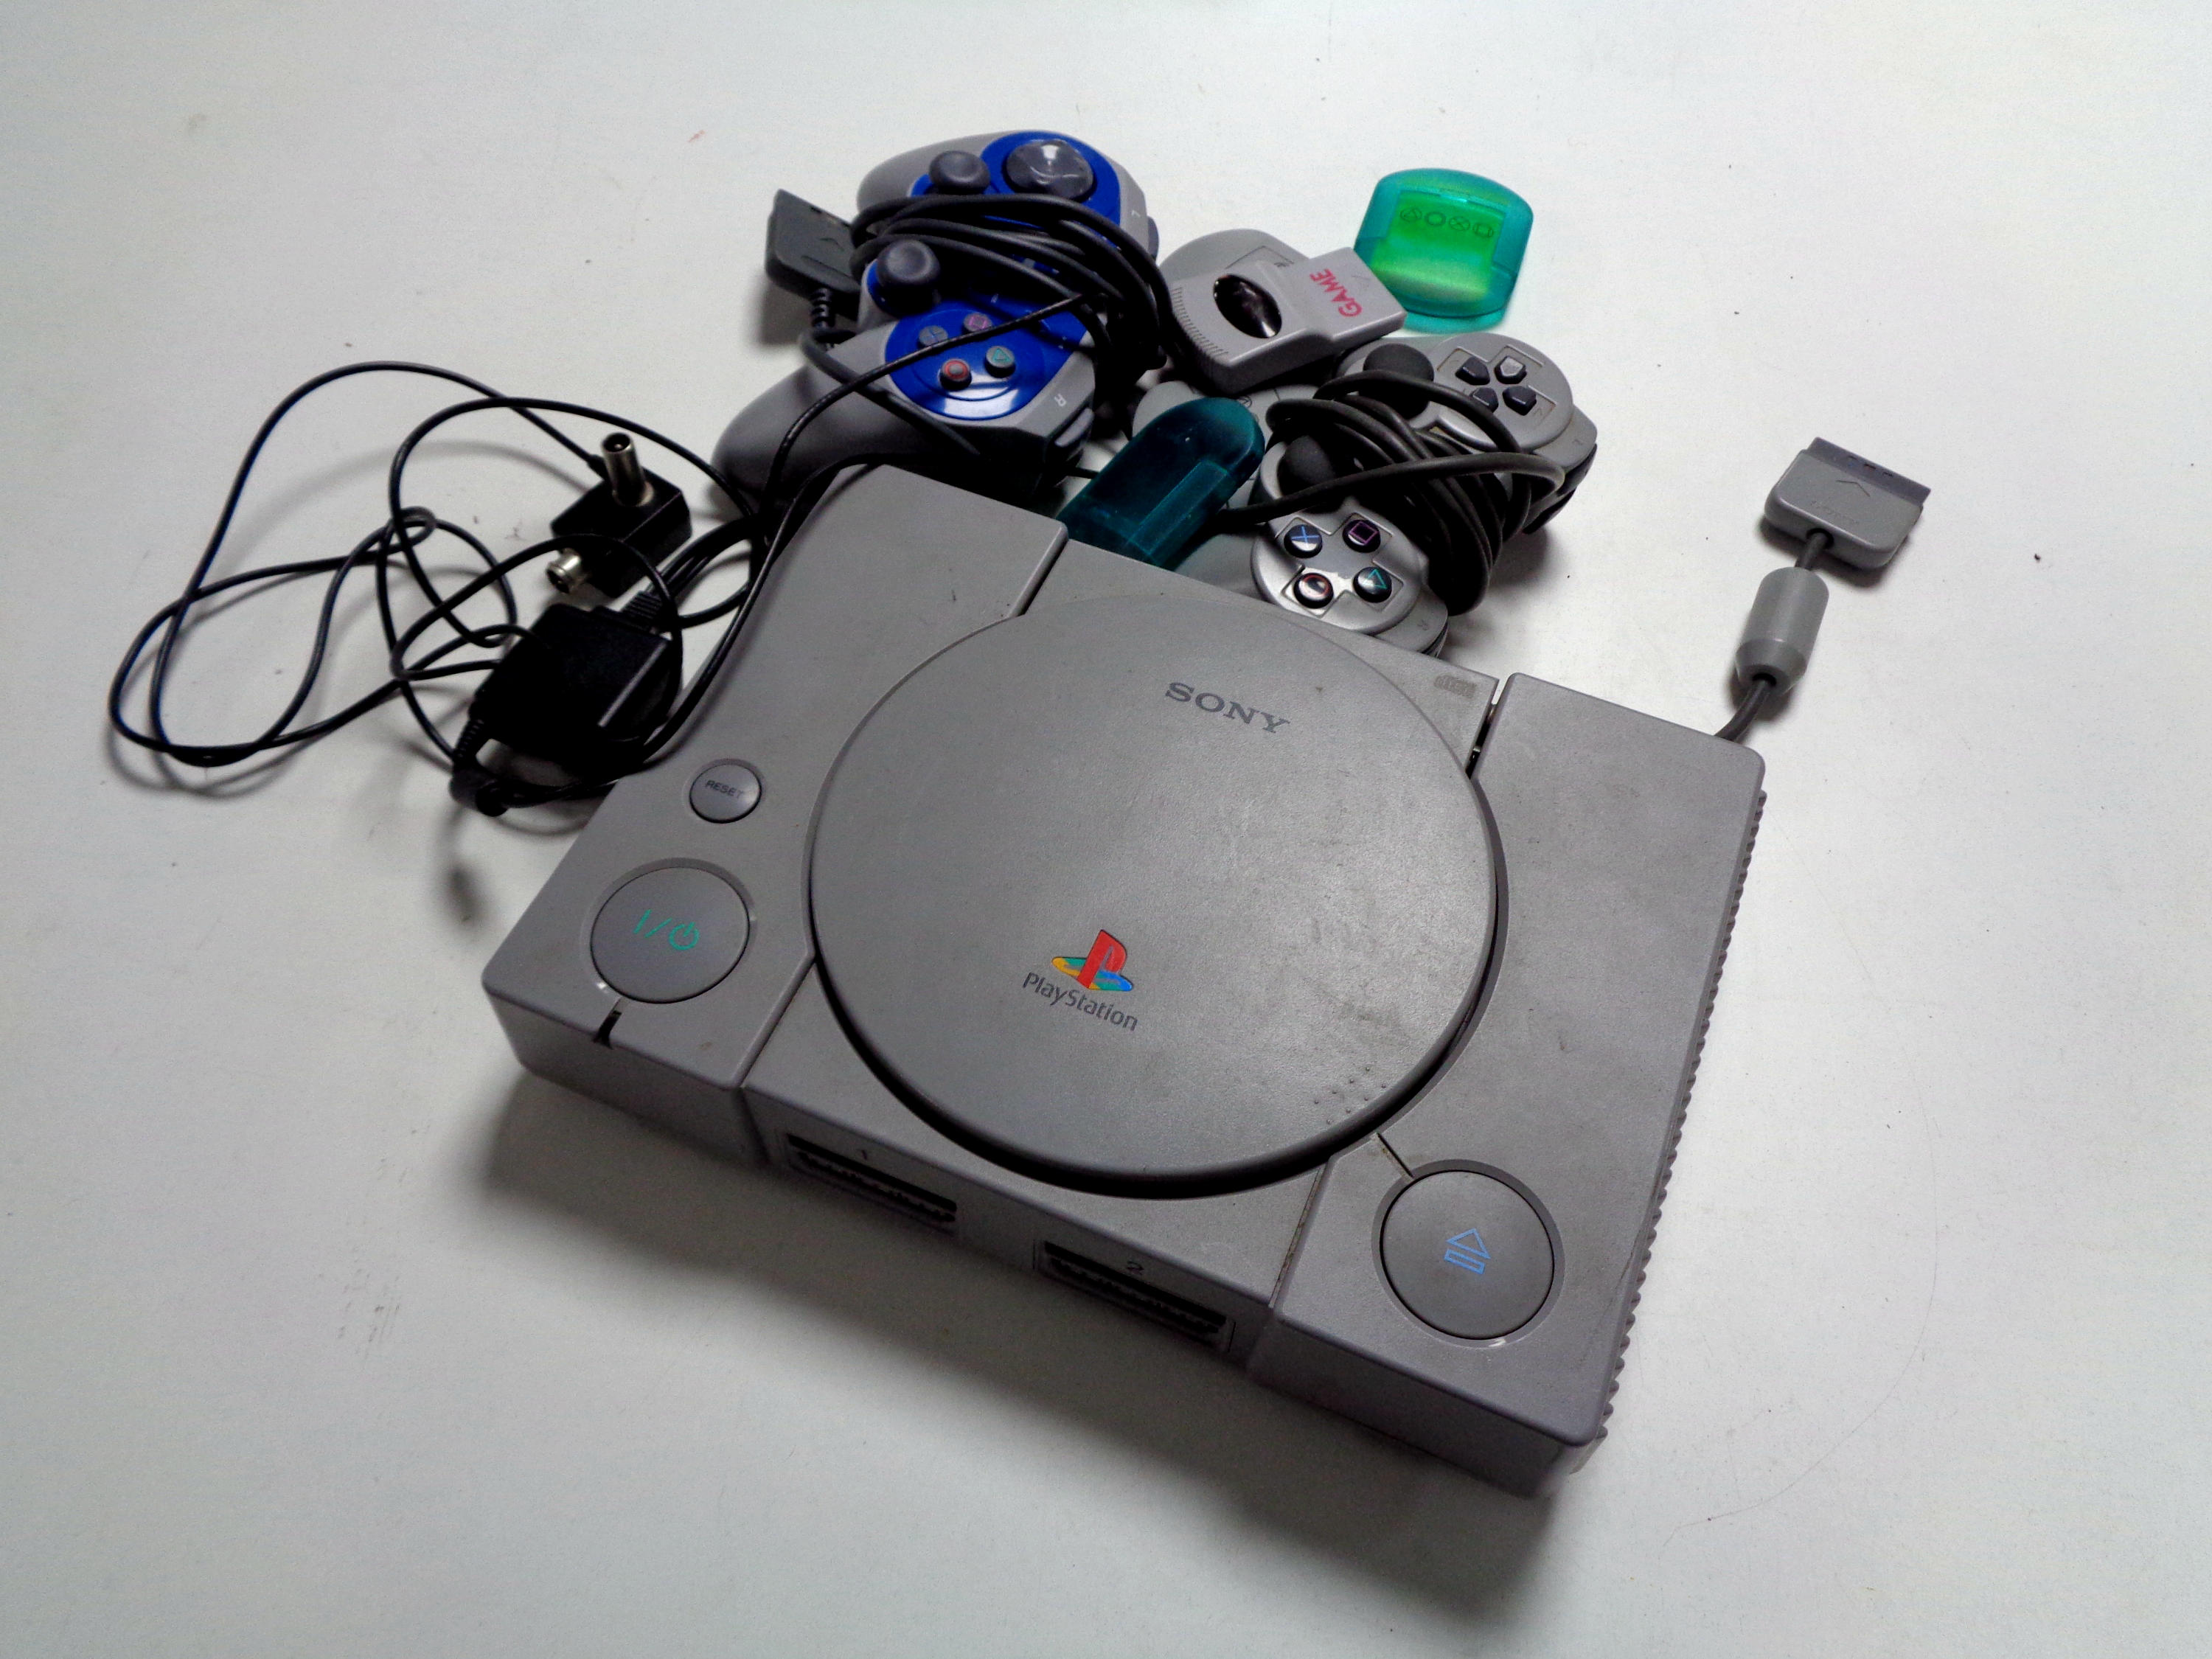 A Sony Playstation with controllers,